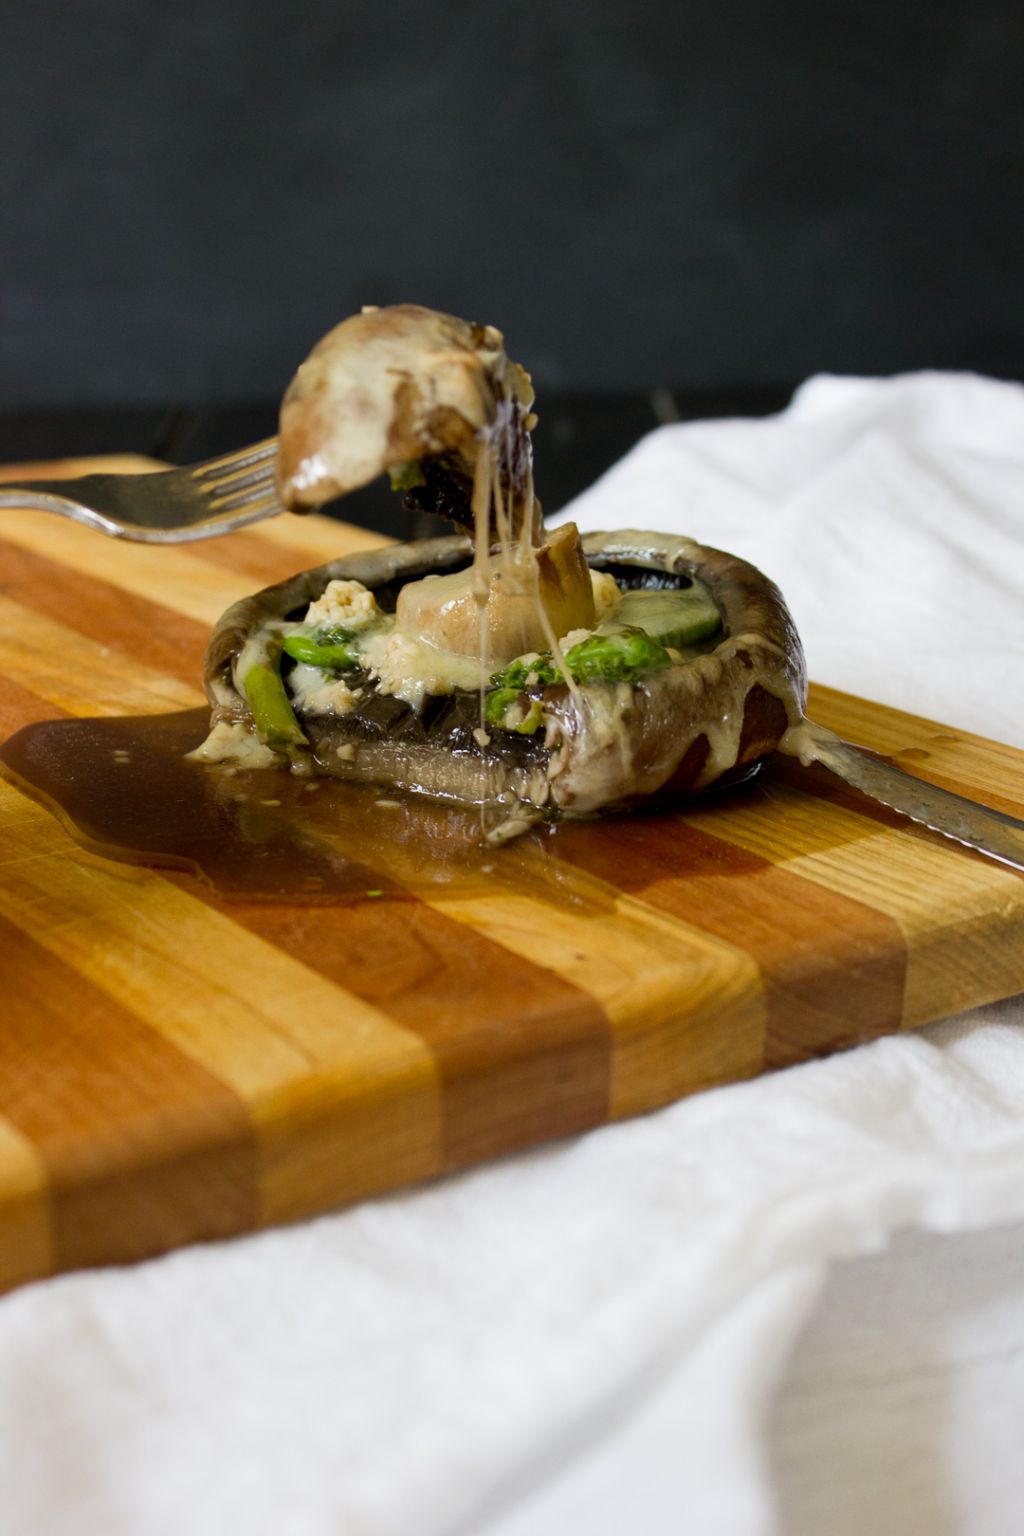 What better way to enjoy fiddleheads than on the barbecue in these Fiddlehead Stuffed Portobello Mushrooms?